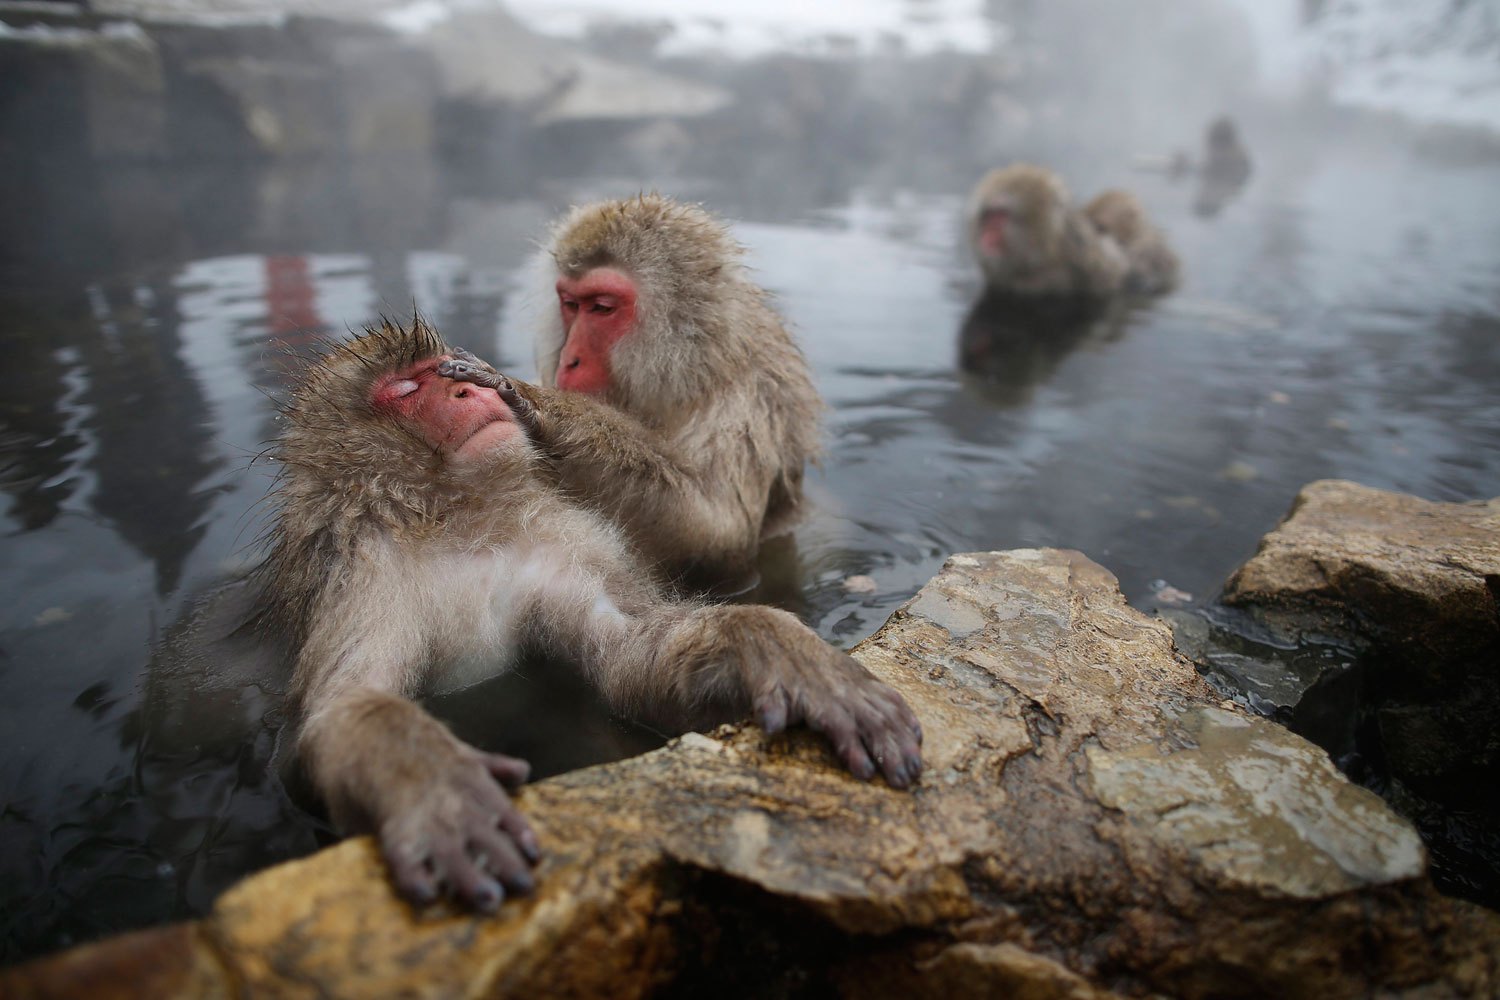 Japanese Macaques - or Snow Monkeys - groom each other in a hot spring at a snow-covered valley in Yamanouchi town, central Japan, Jan. 20, 2014.